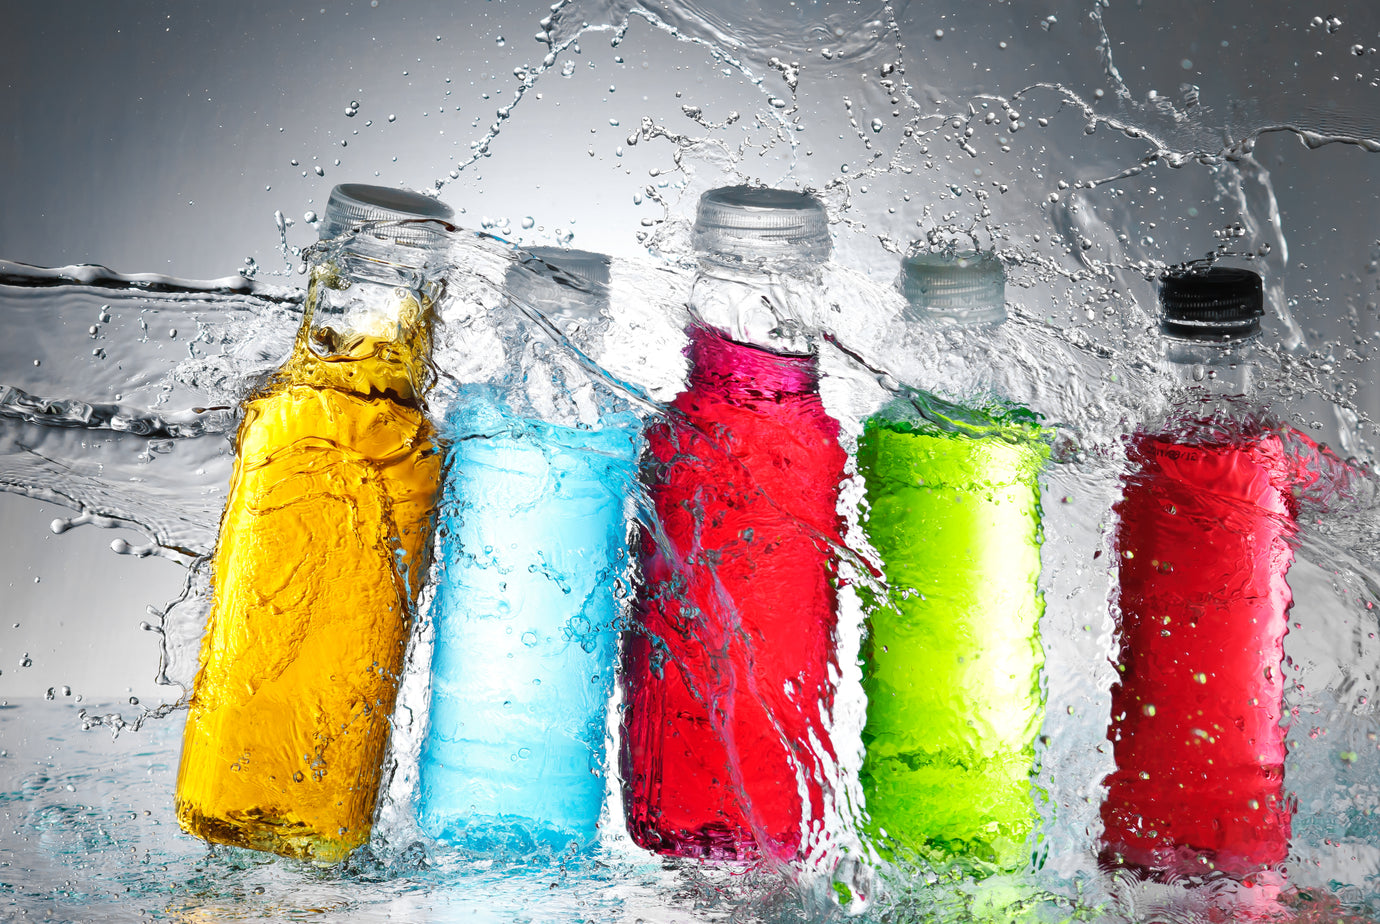 Energy Drinks -- most have unsafe levels of Caffeine and Sugar